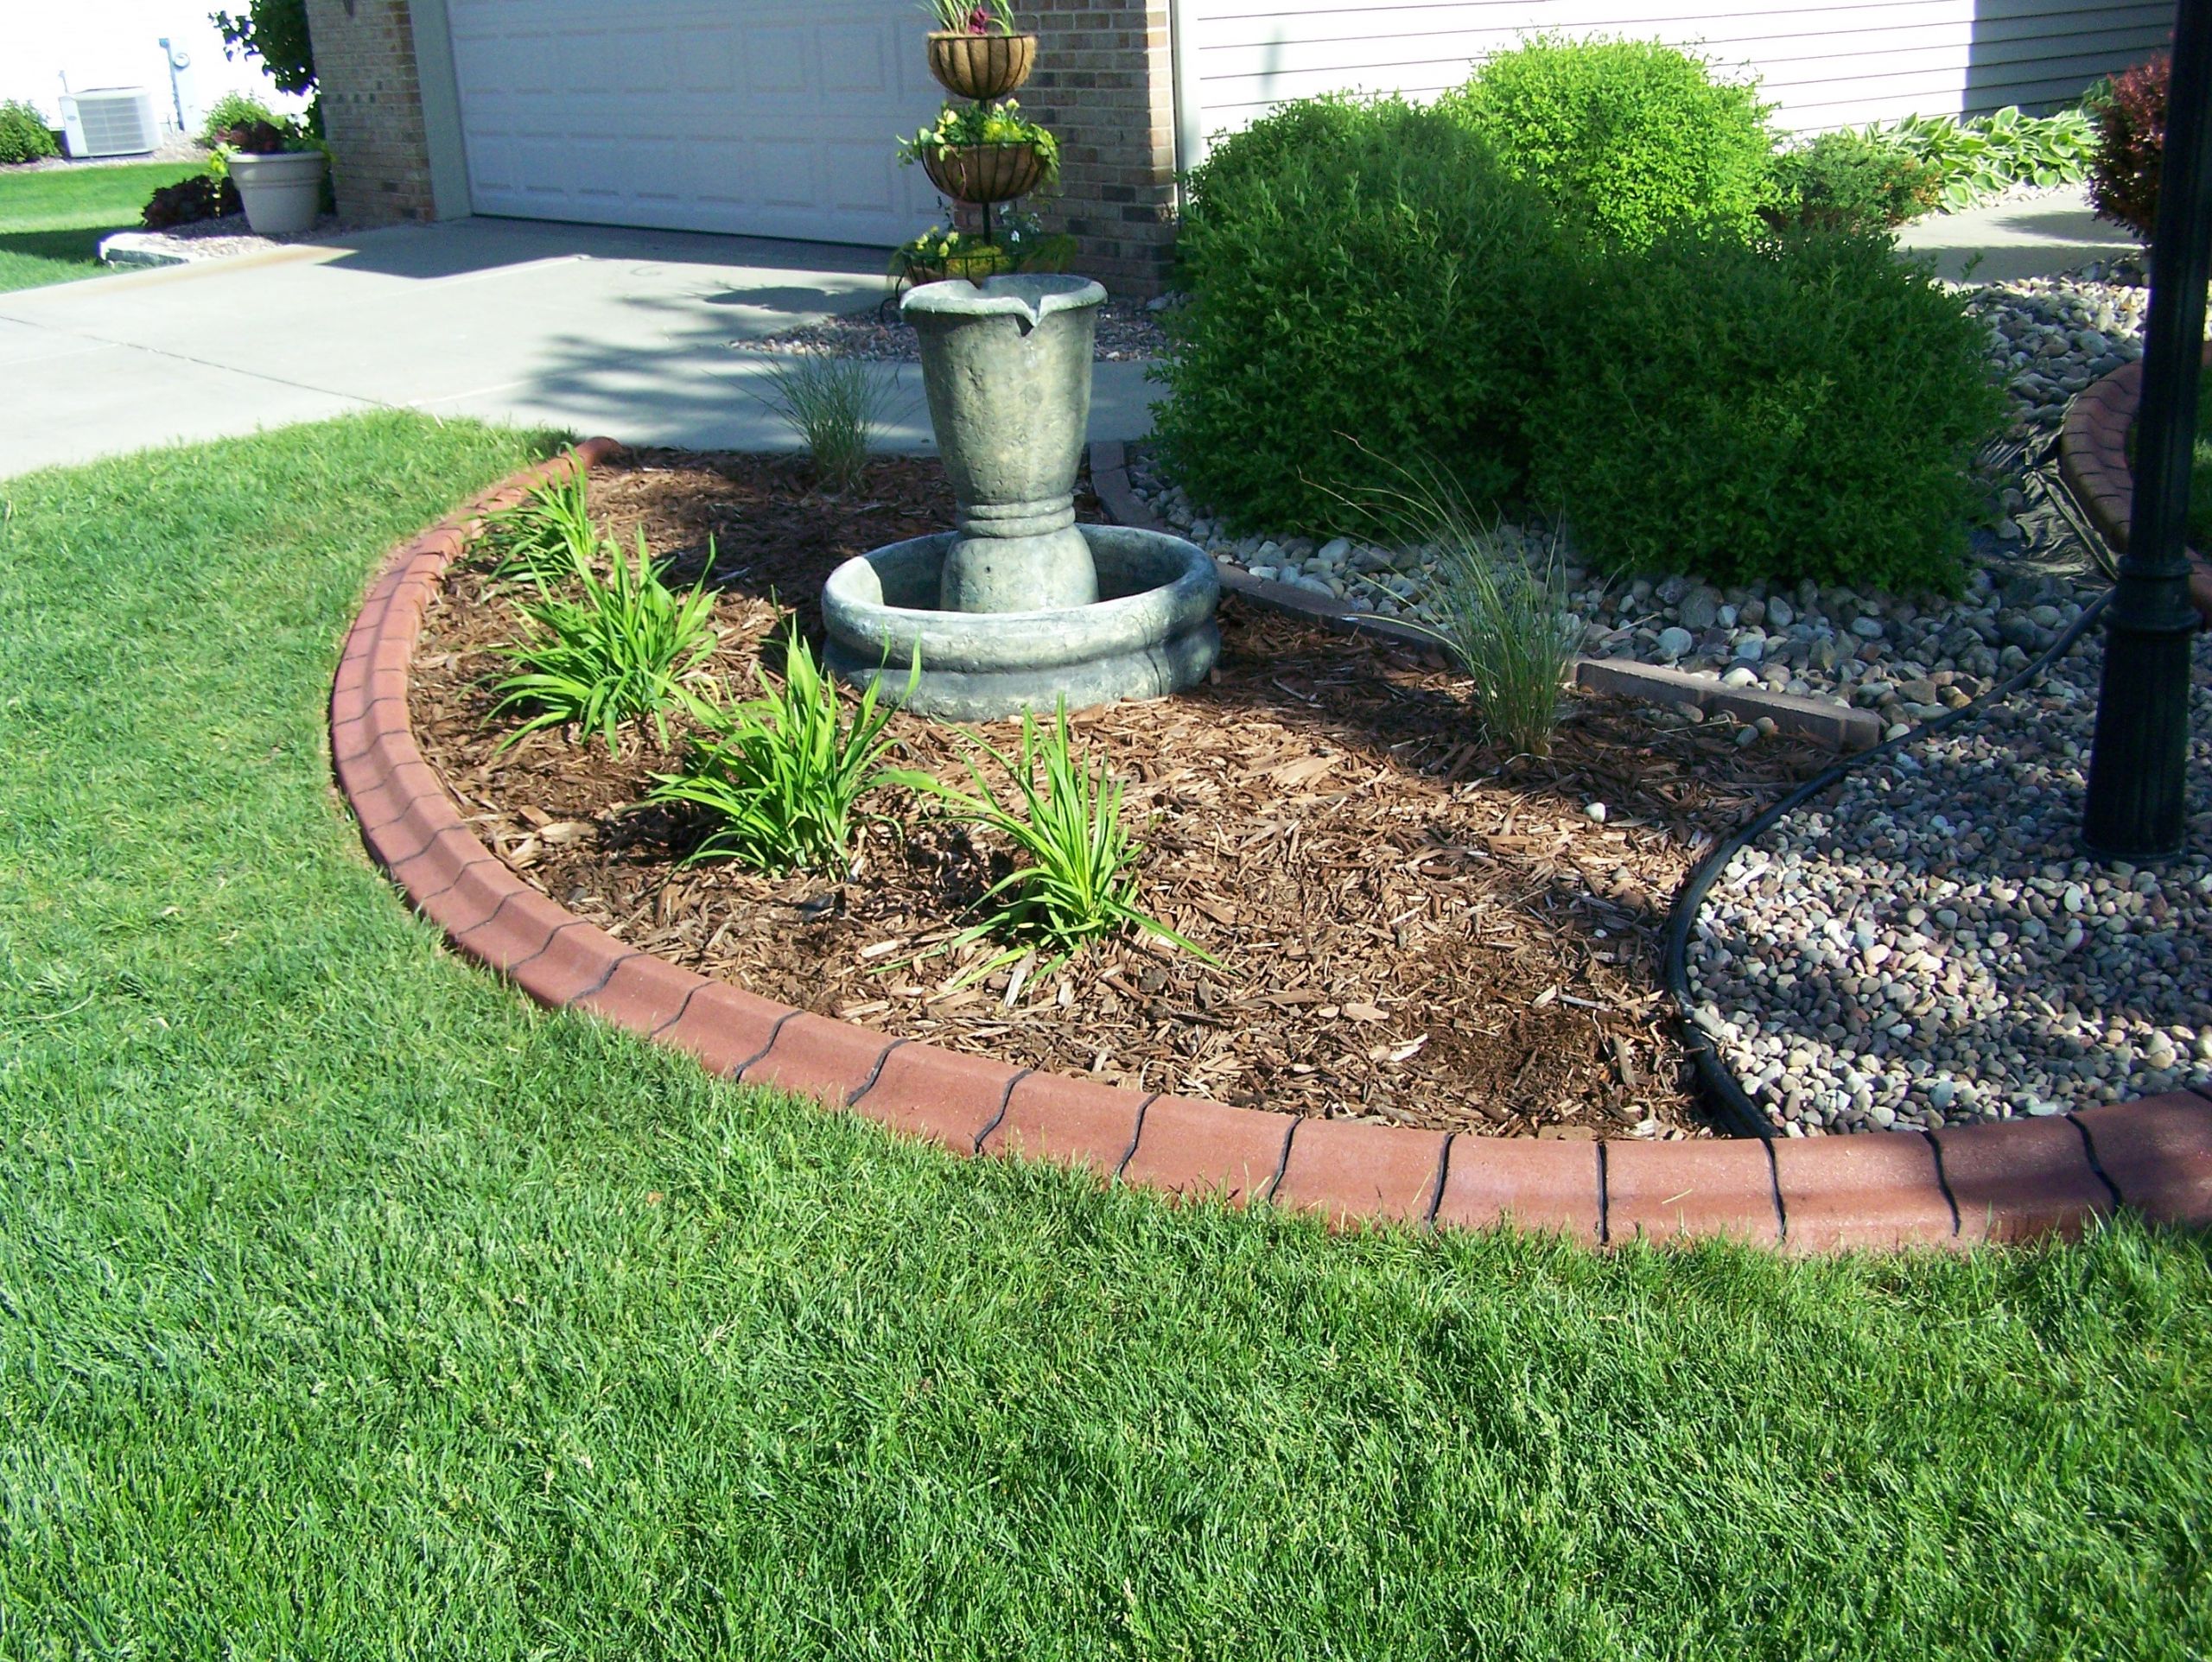 Home Depot Landscape Edging
 Outdoor Lawn Edging Home Depot To Have Attractive